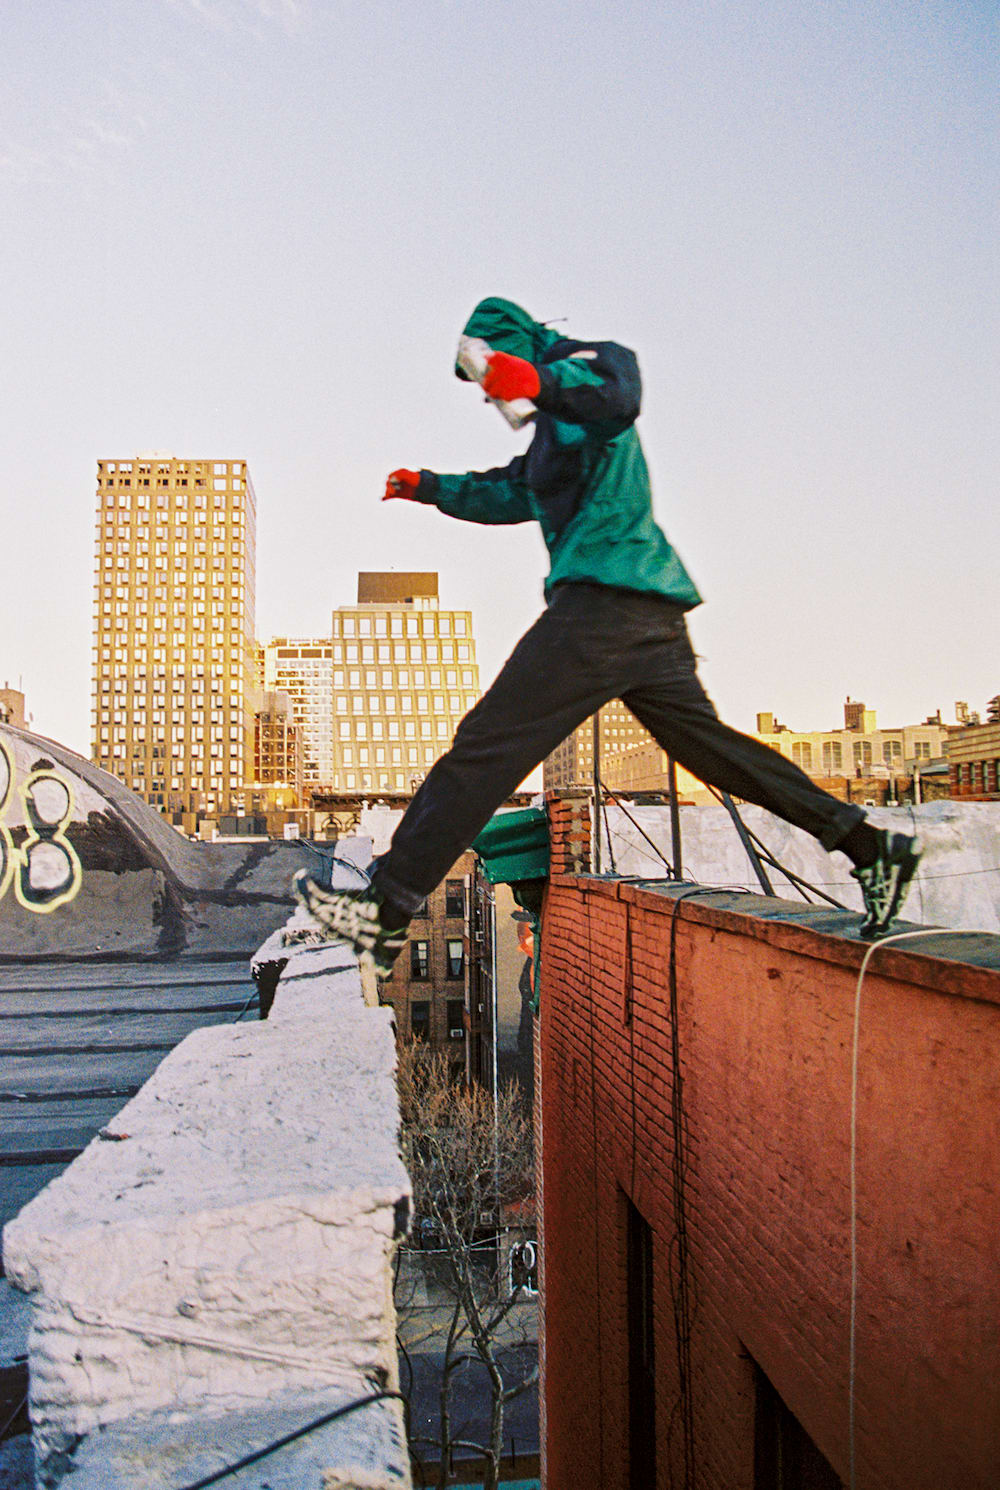 Reboe LNE Leaps Across a Rooftop in NYC by Jacob Consenstein